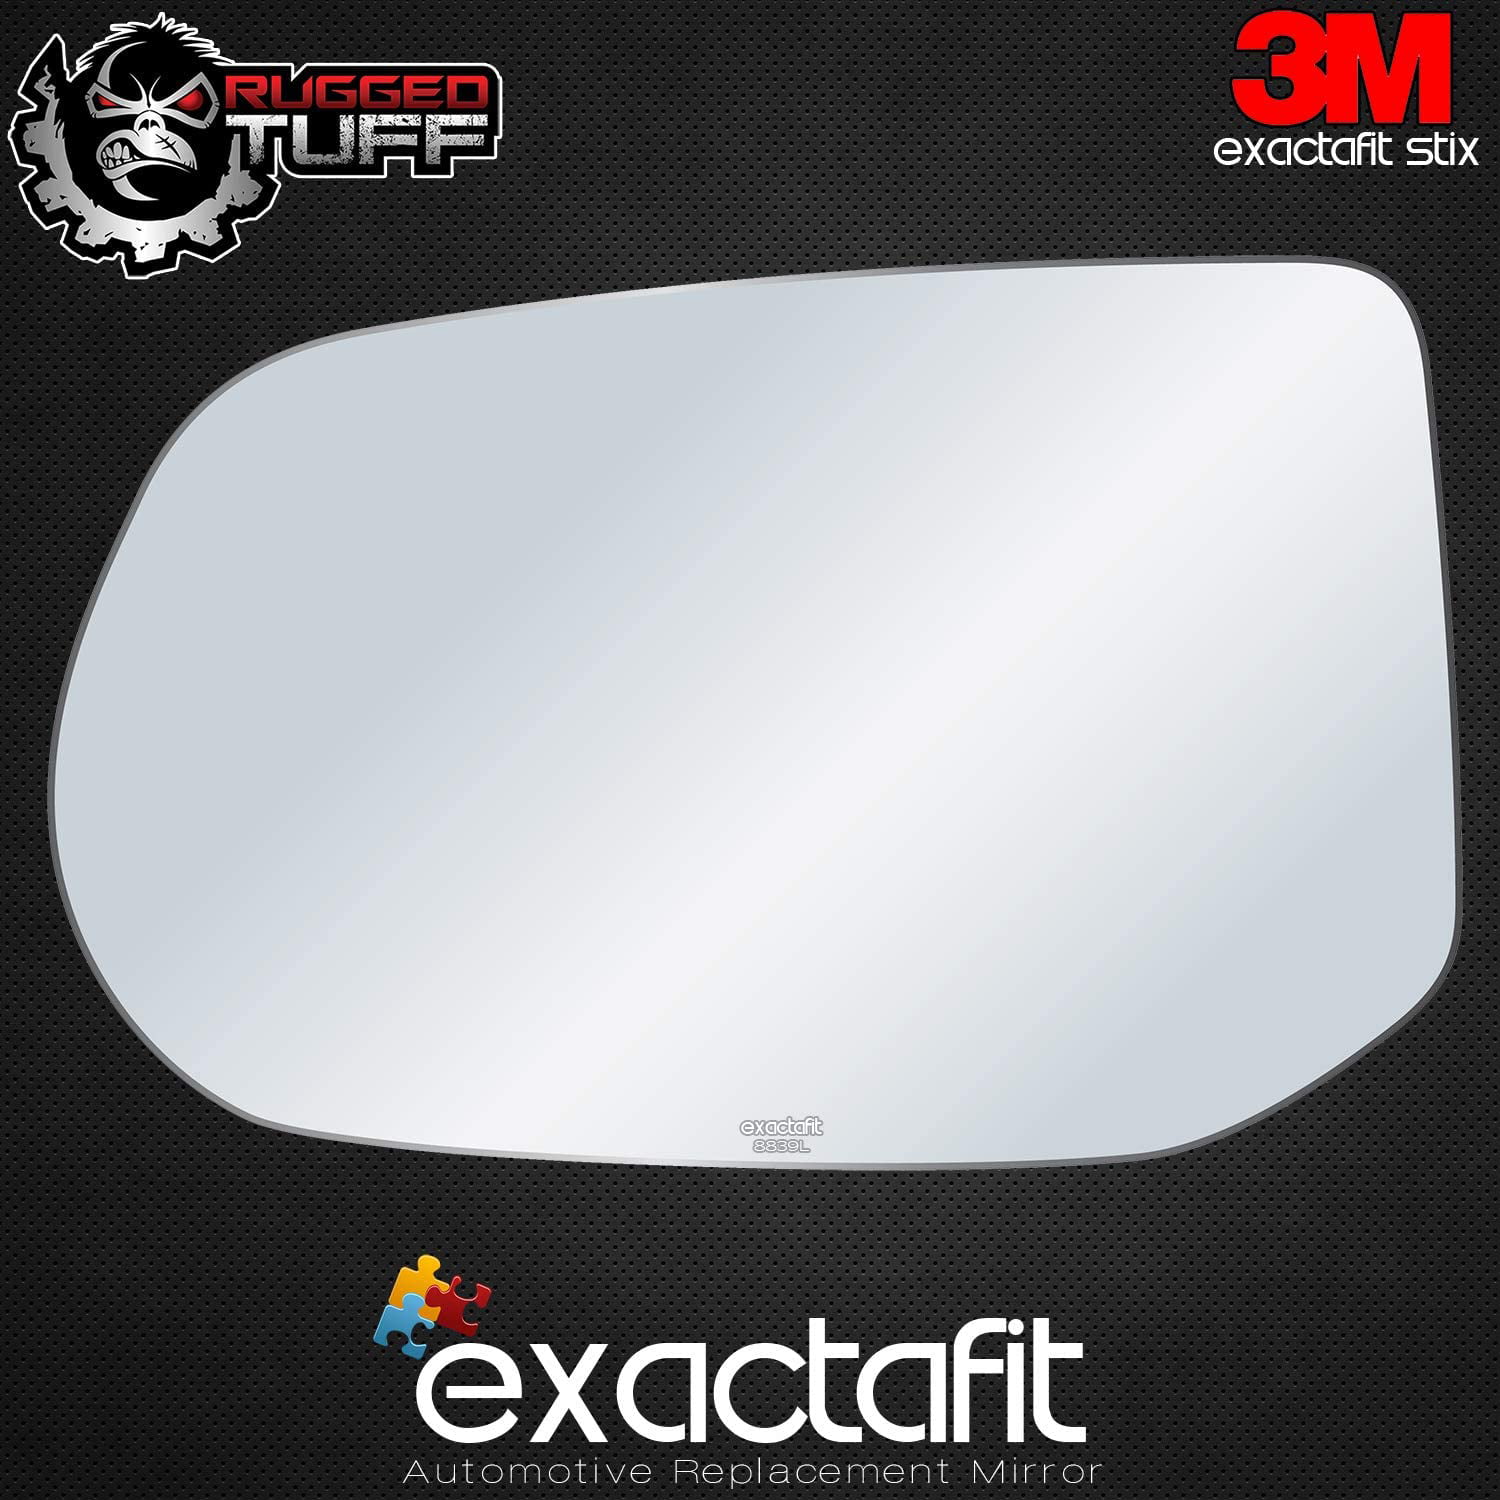 exactafit 8839L Driver Left Side Mirror Glass Replacement fits 2006-2011 Honda Civic by Rugged TUFF 